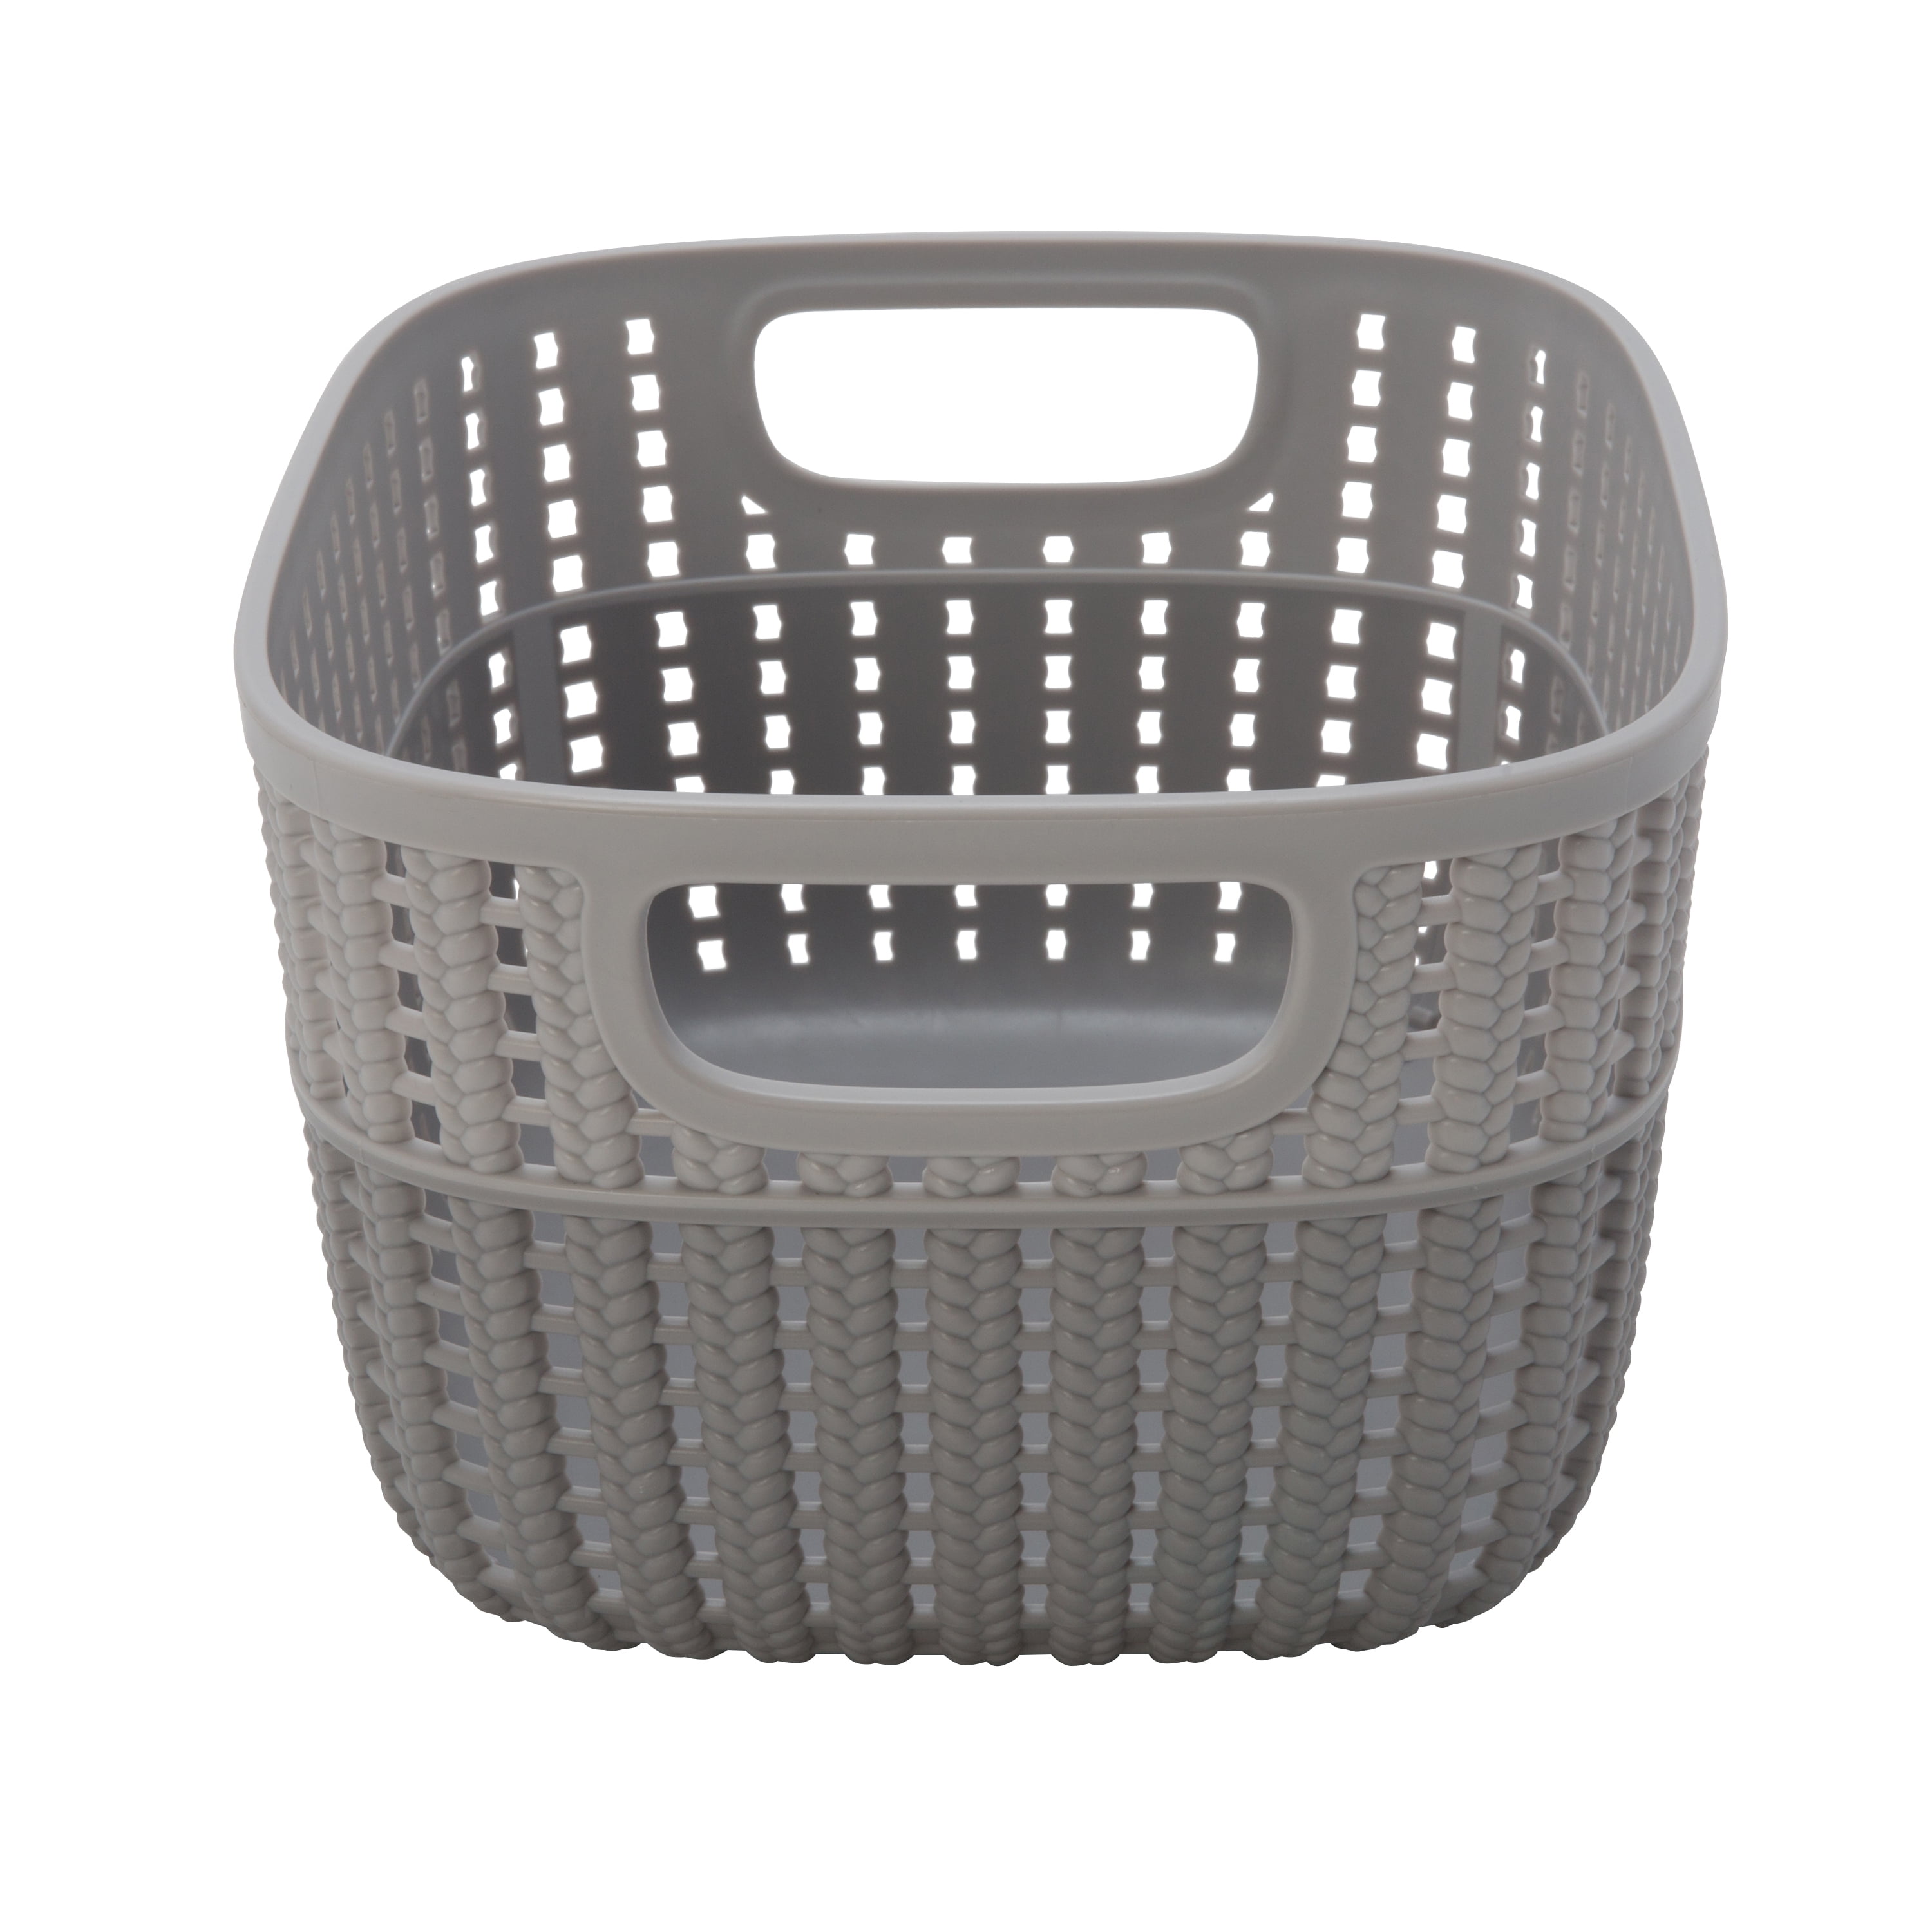 Small Plastic Basket Weave Tote, Gray, 10 x 7 inches